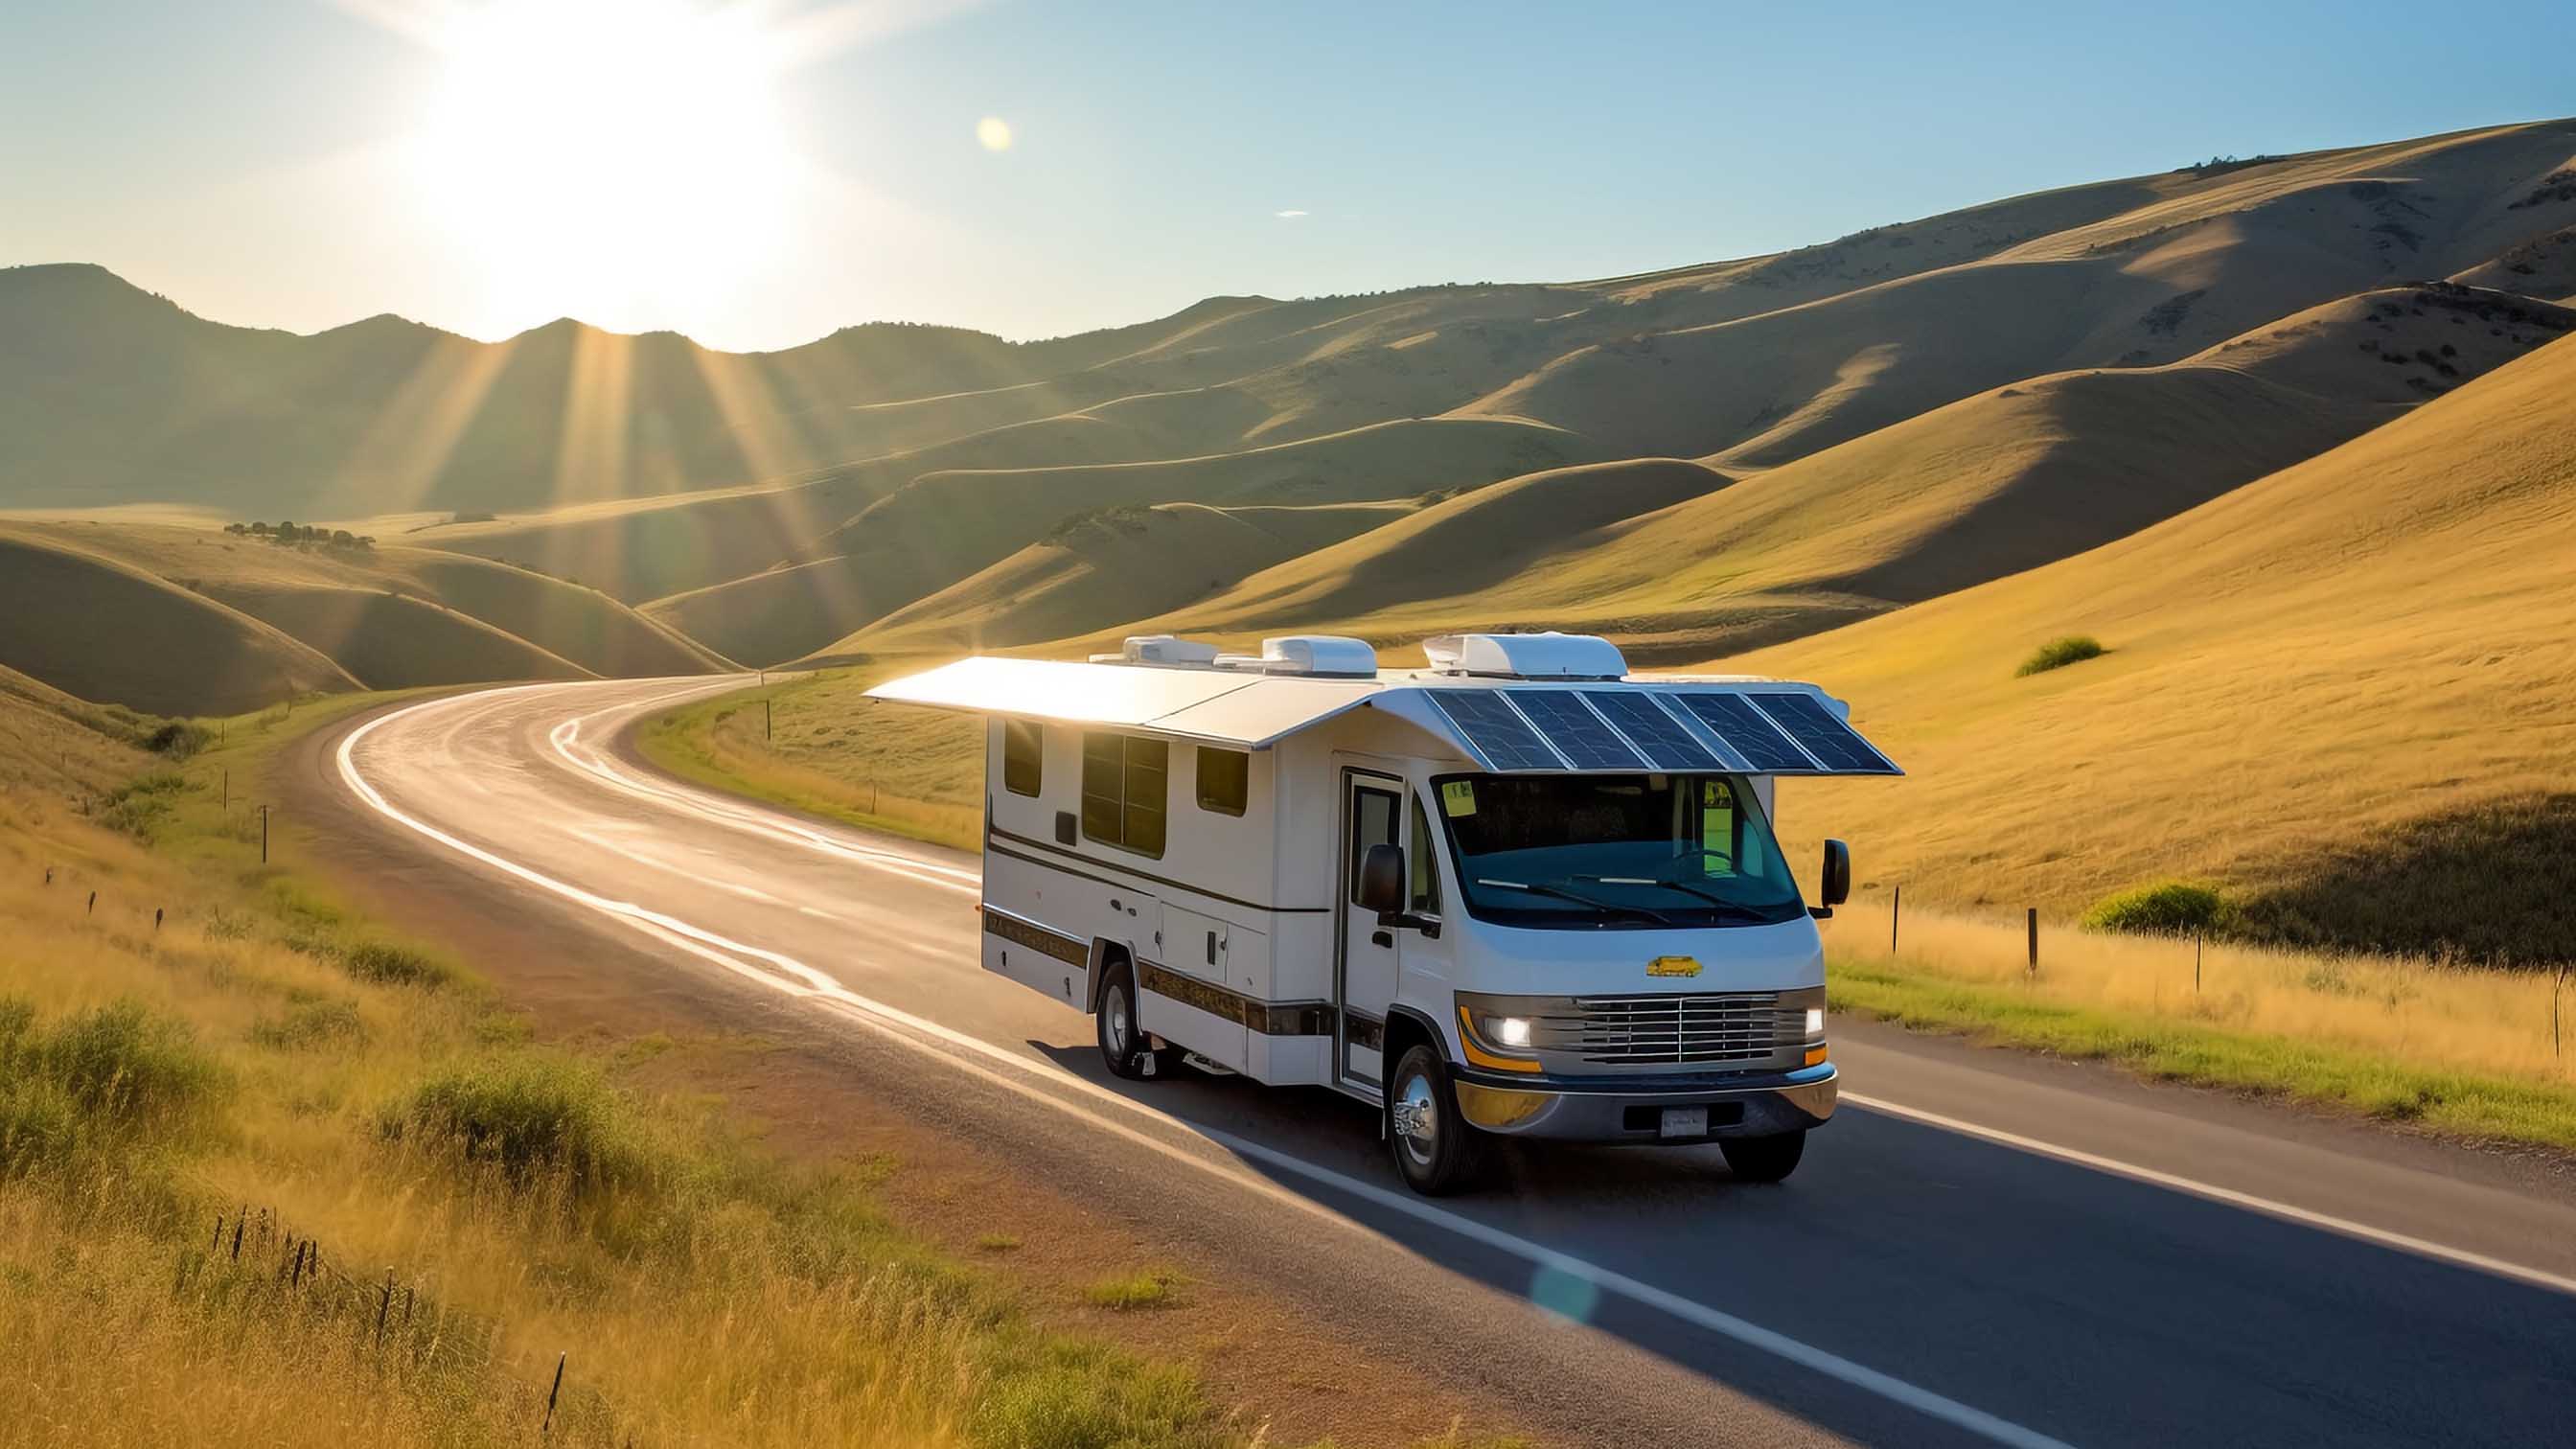 The application of new solar energy in RV